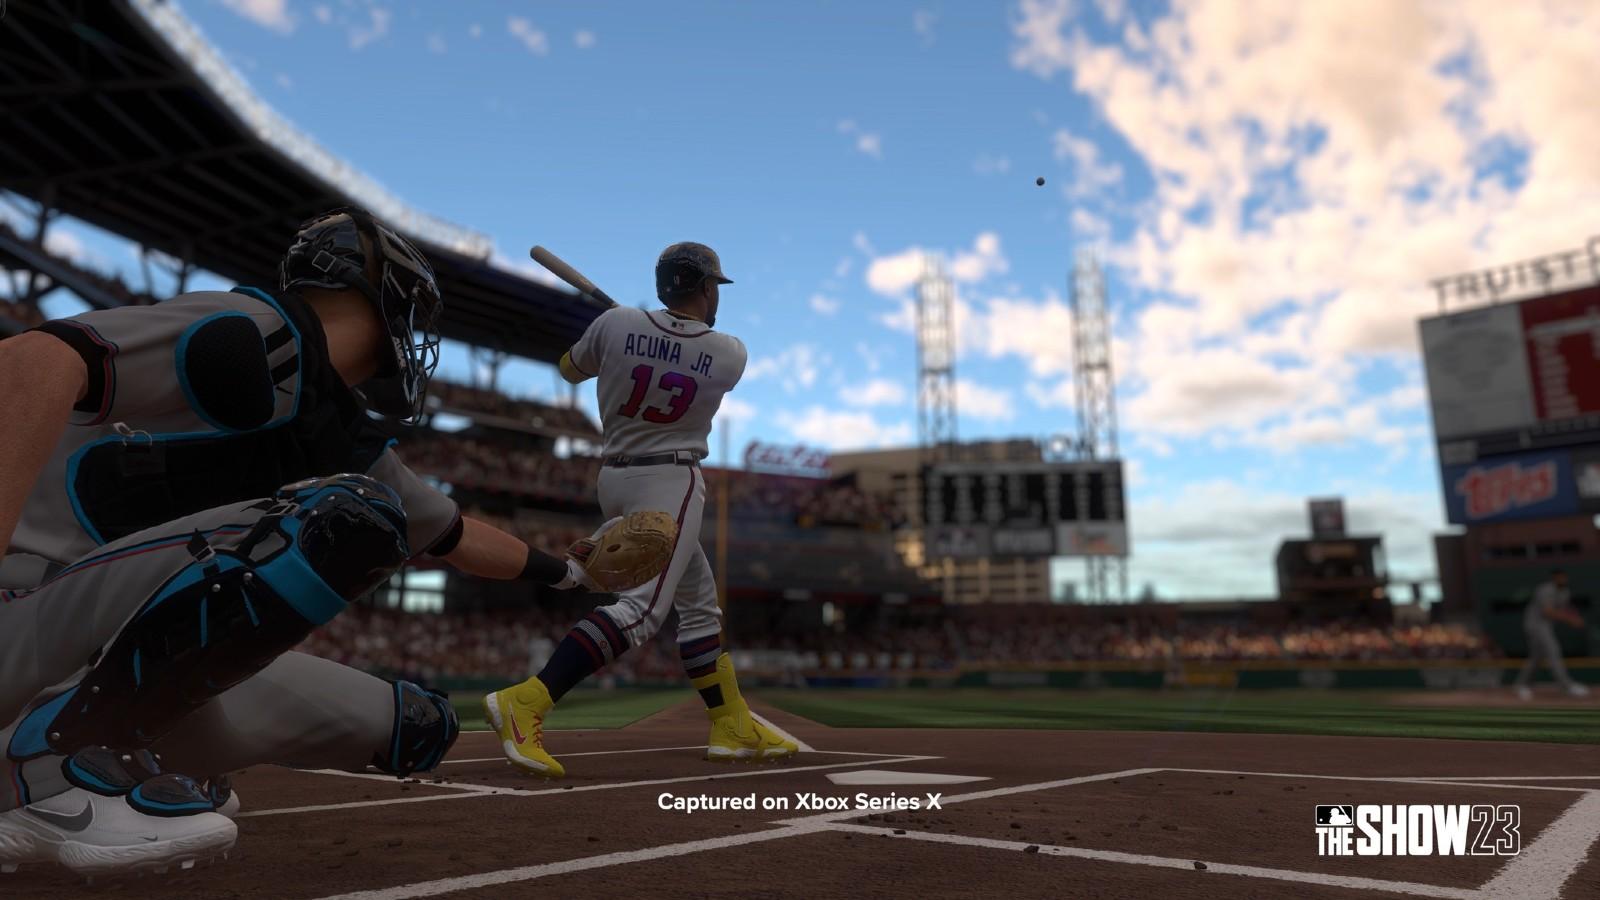 MLB The Show 23: All Player Attributes and Terminology Explained